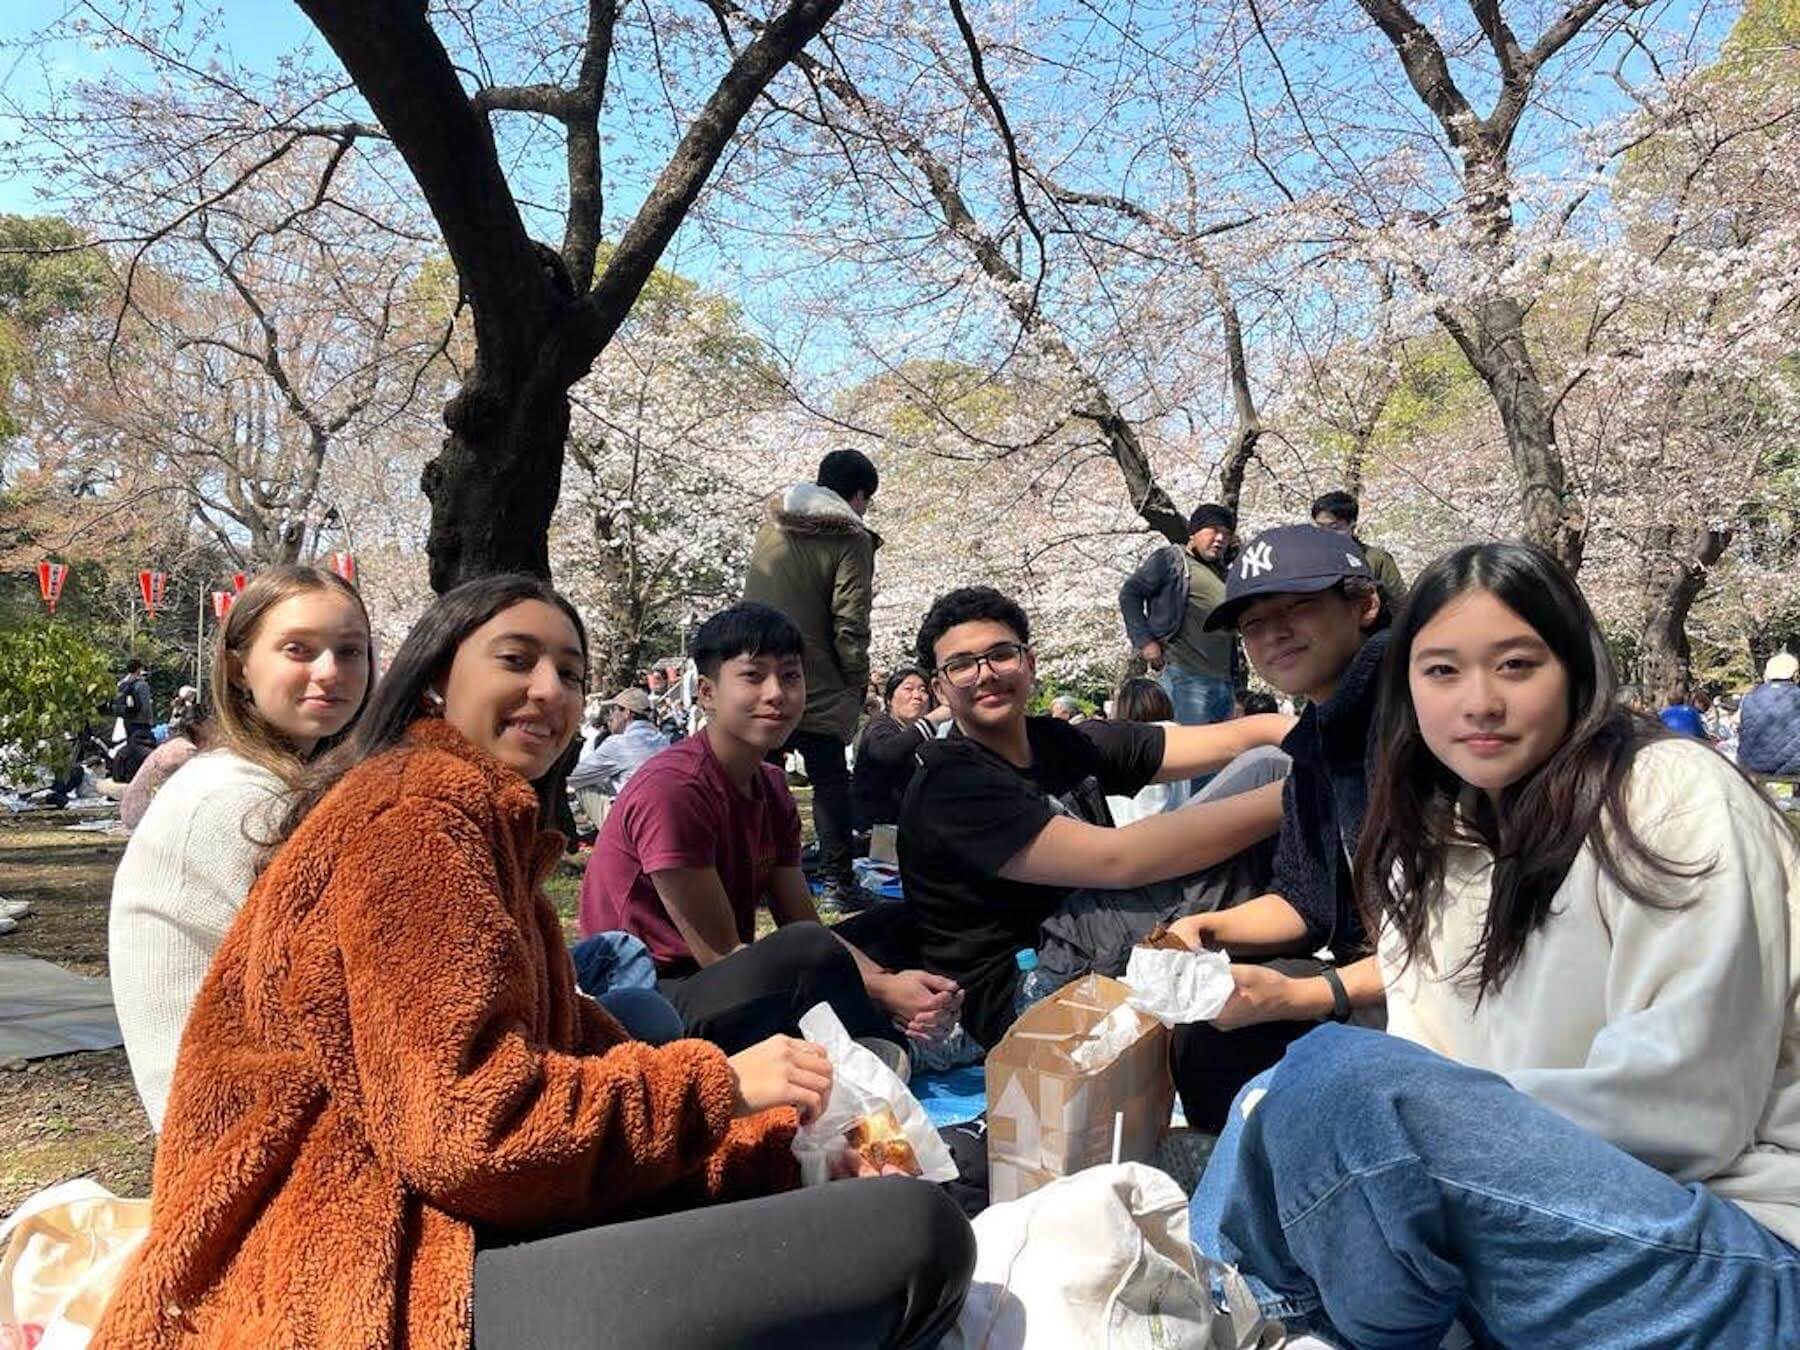 A group of Ethical Culture Fieldston Upper School students picnic under cherry blossoms in Japan